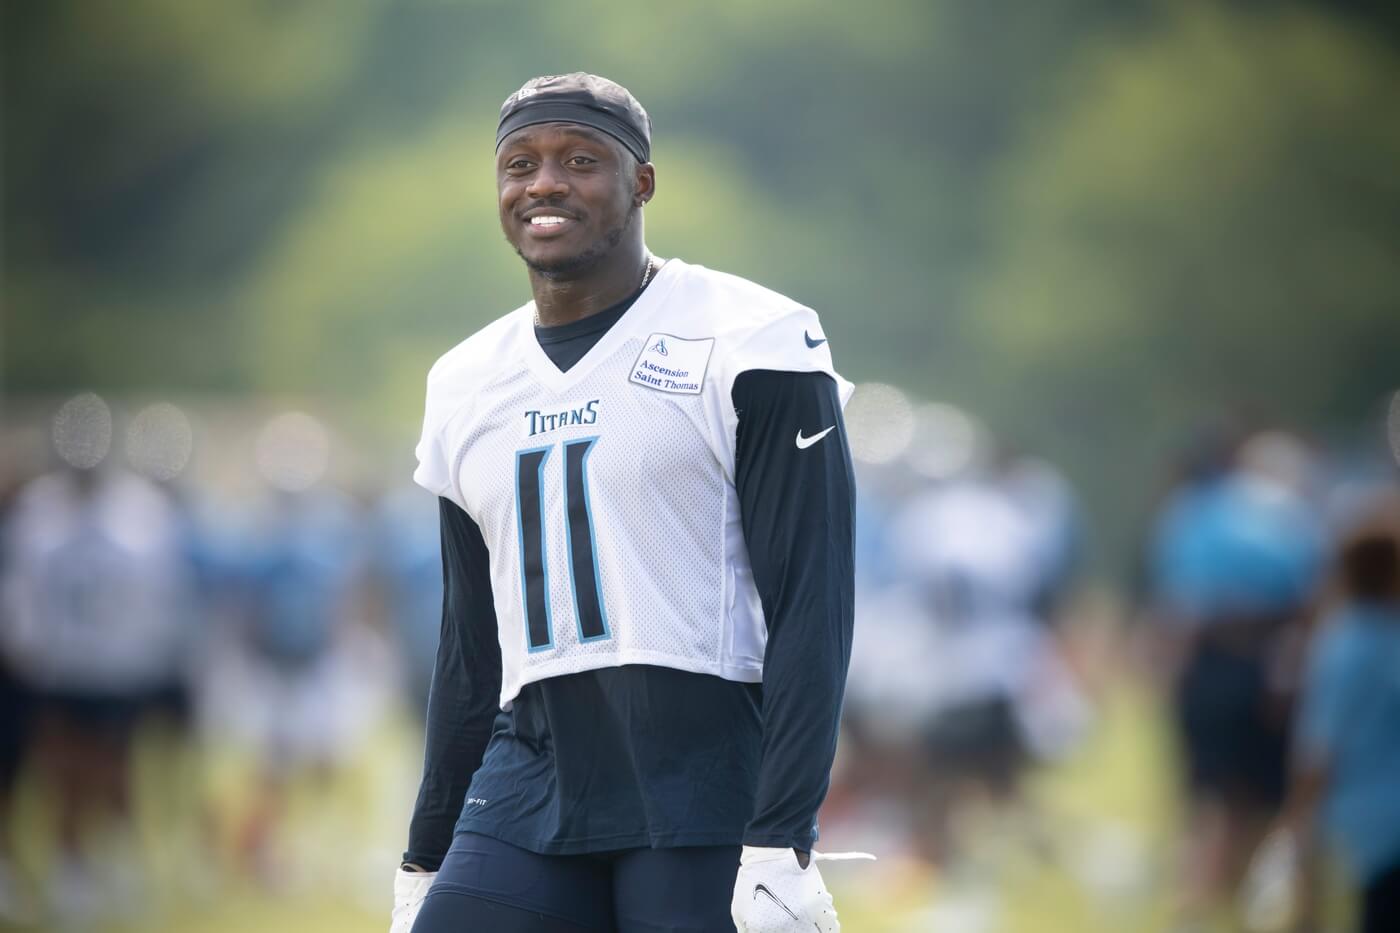 Tennessee Titans wide receiver A.J. Brown (11) smiles during a training camp practice at Saint Thomas Sports Park Thursday, July 29, 2021 in Nashville, Tenn. Nas 0728 Titans Camp 019